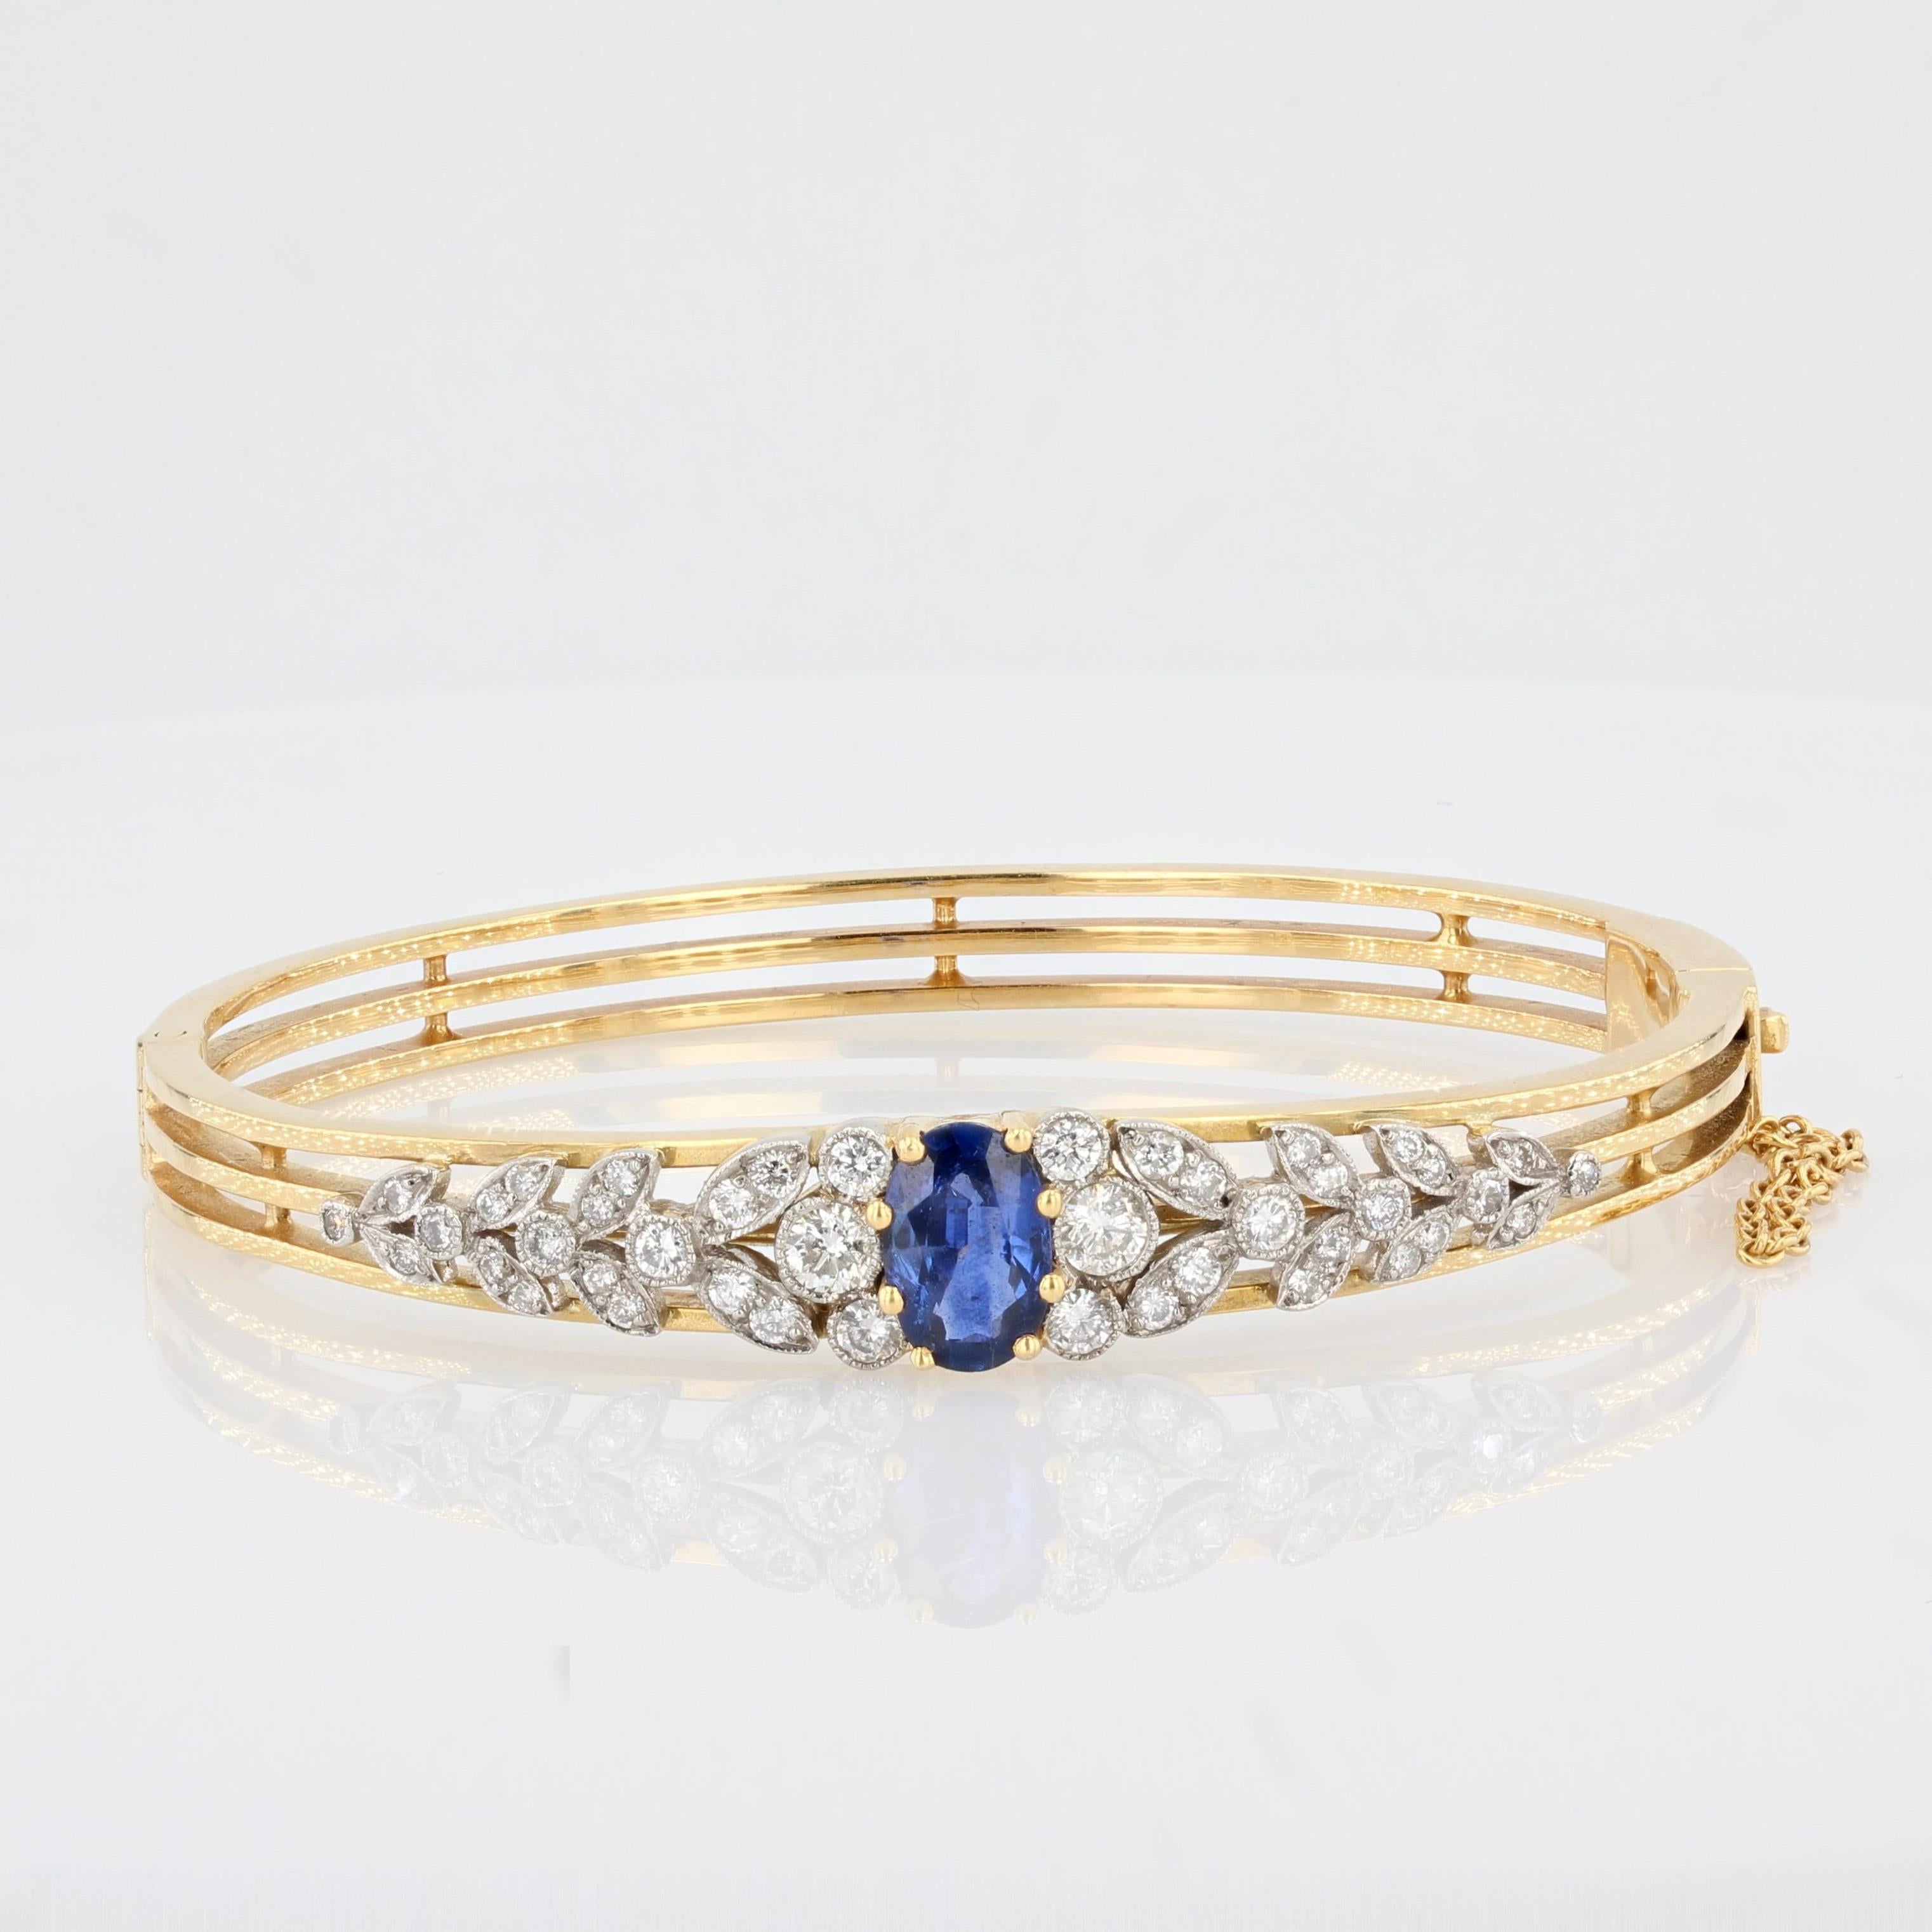 Bracelet in 18 carat yellow gold, eagle head hallmark. 
This superb opening oval bangle bracelet features 3 flat gold strands with a floral design at the front entirely bezel set with brilliant cut round diamonds and a central claw set oval blue